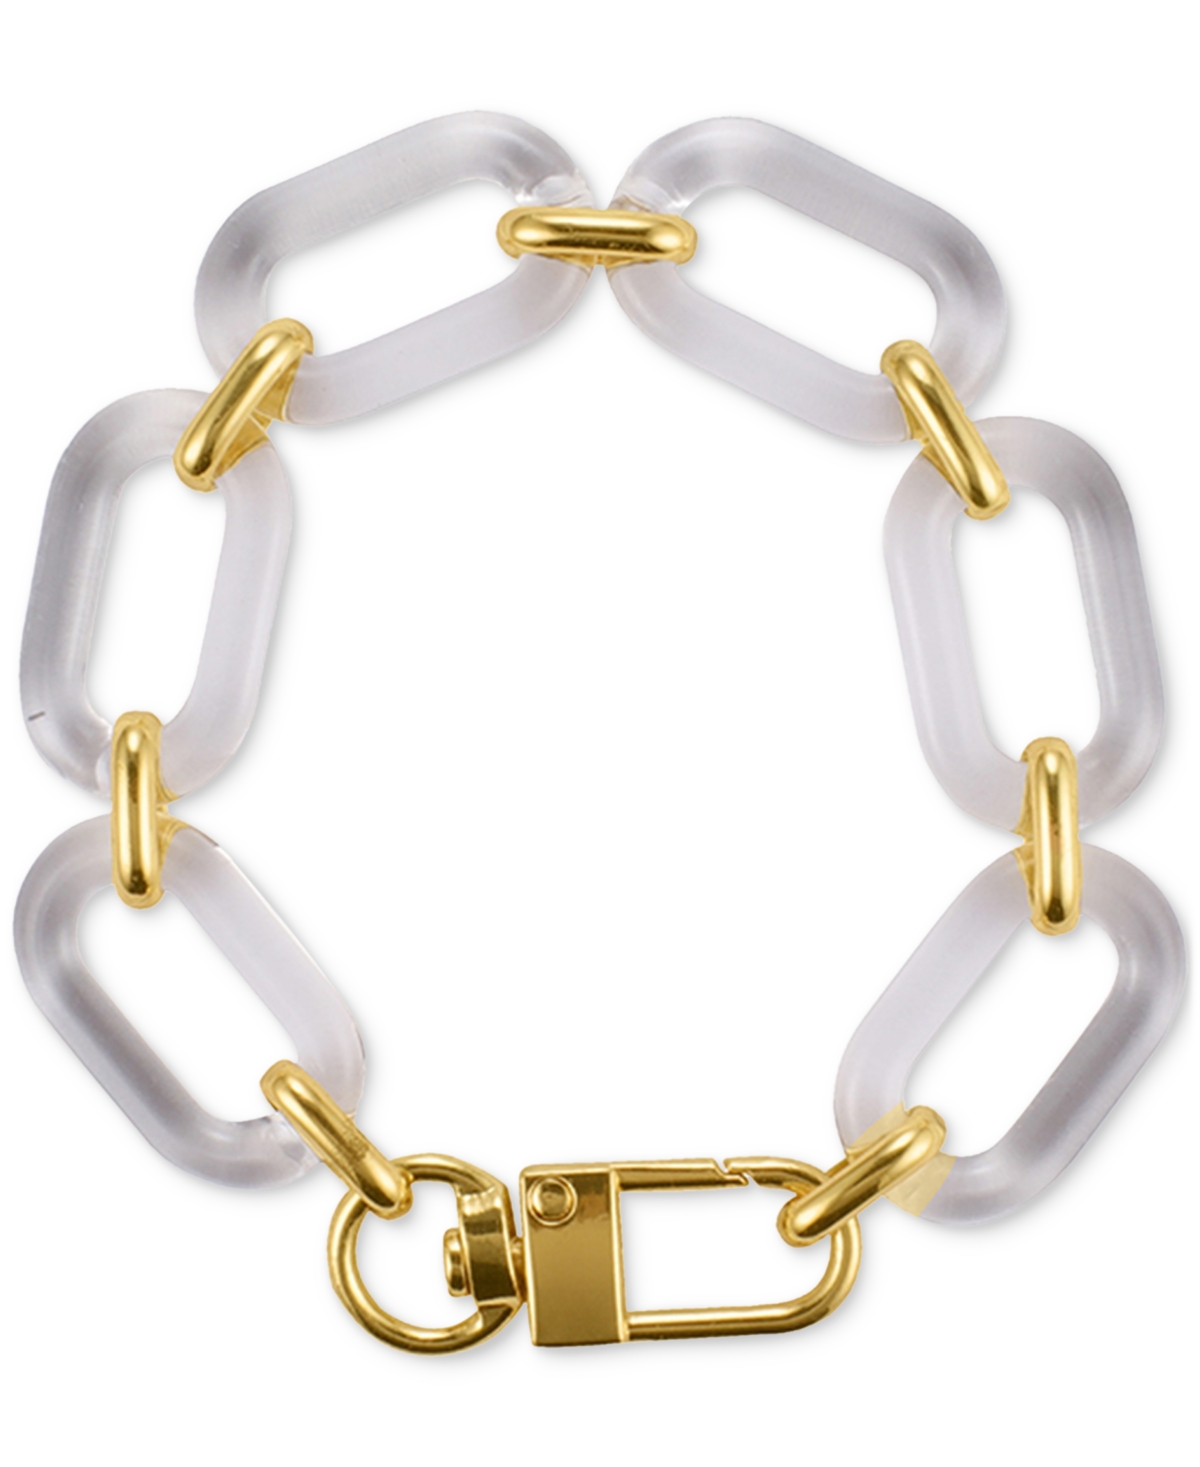 14k Gold-Plated Lucite Statement Chain Bracelet - Gold